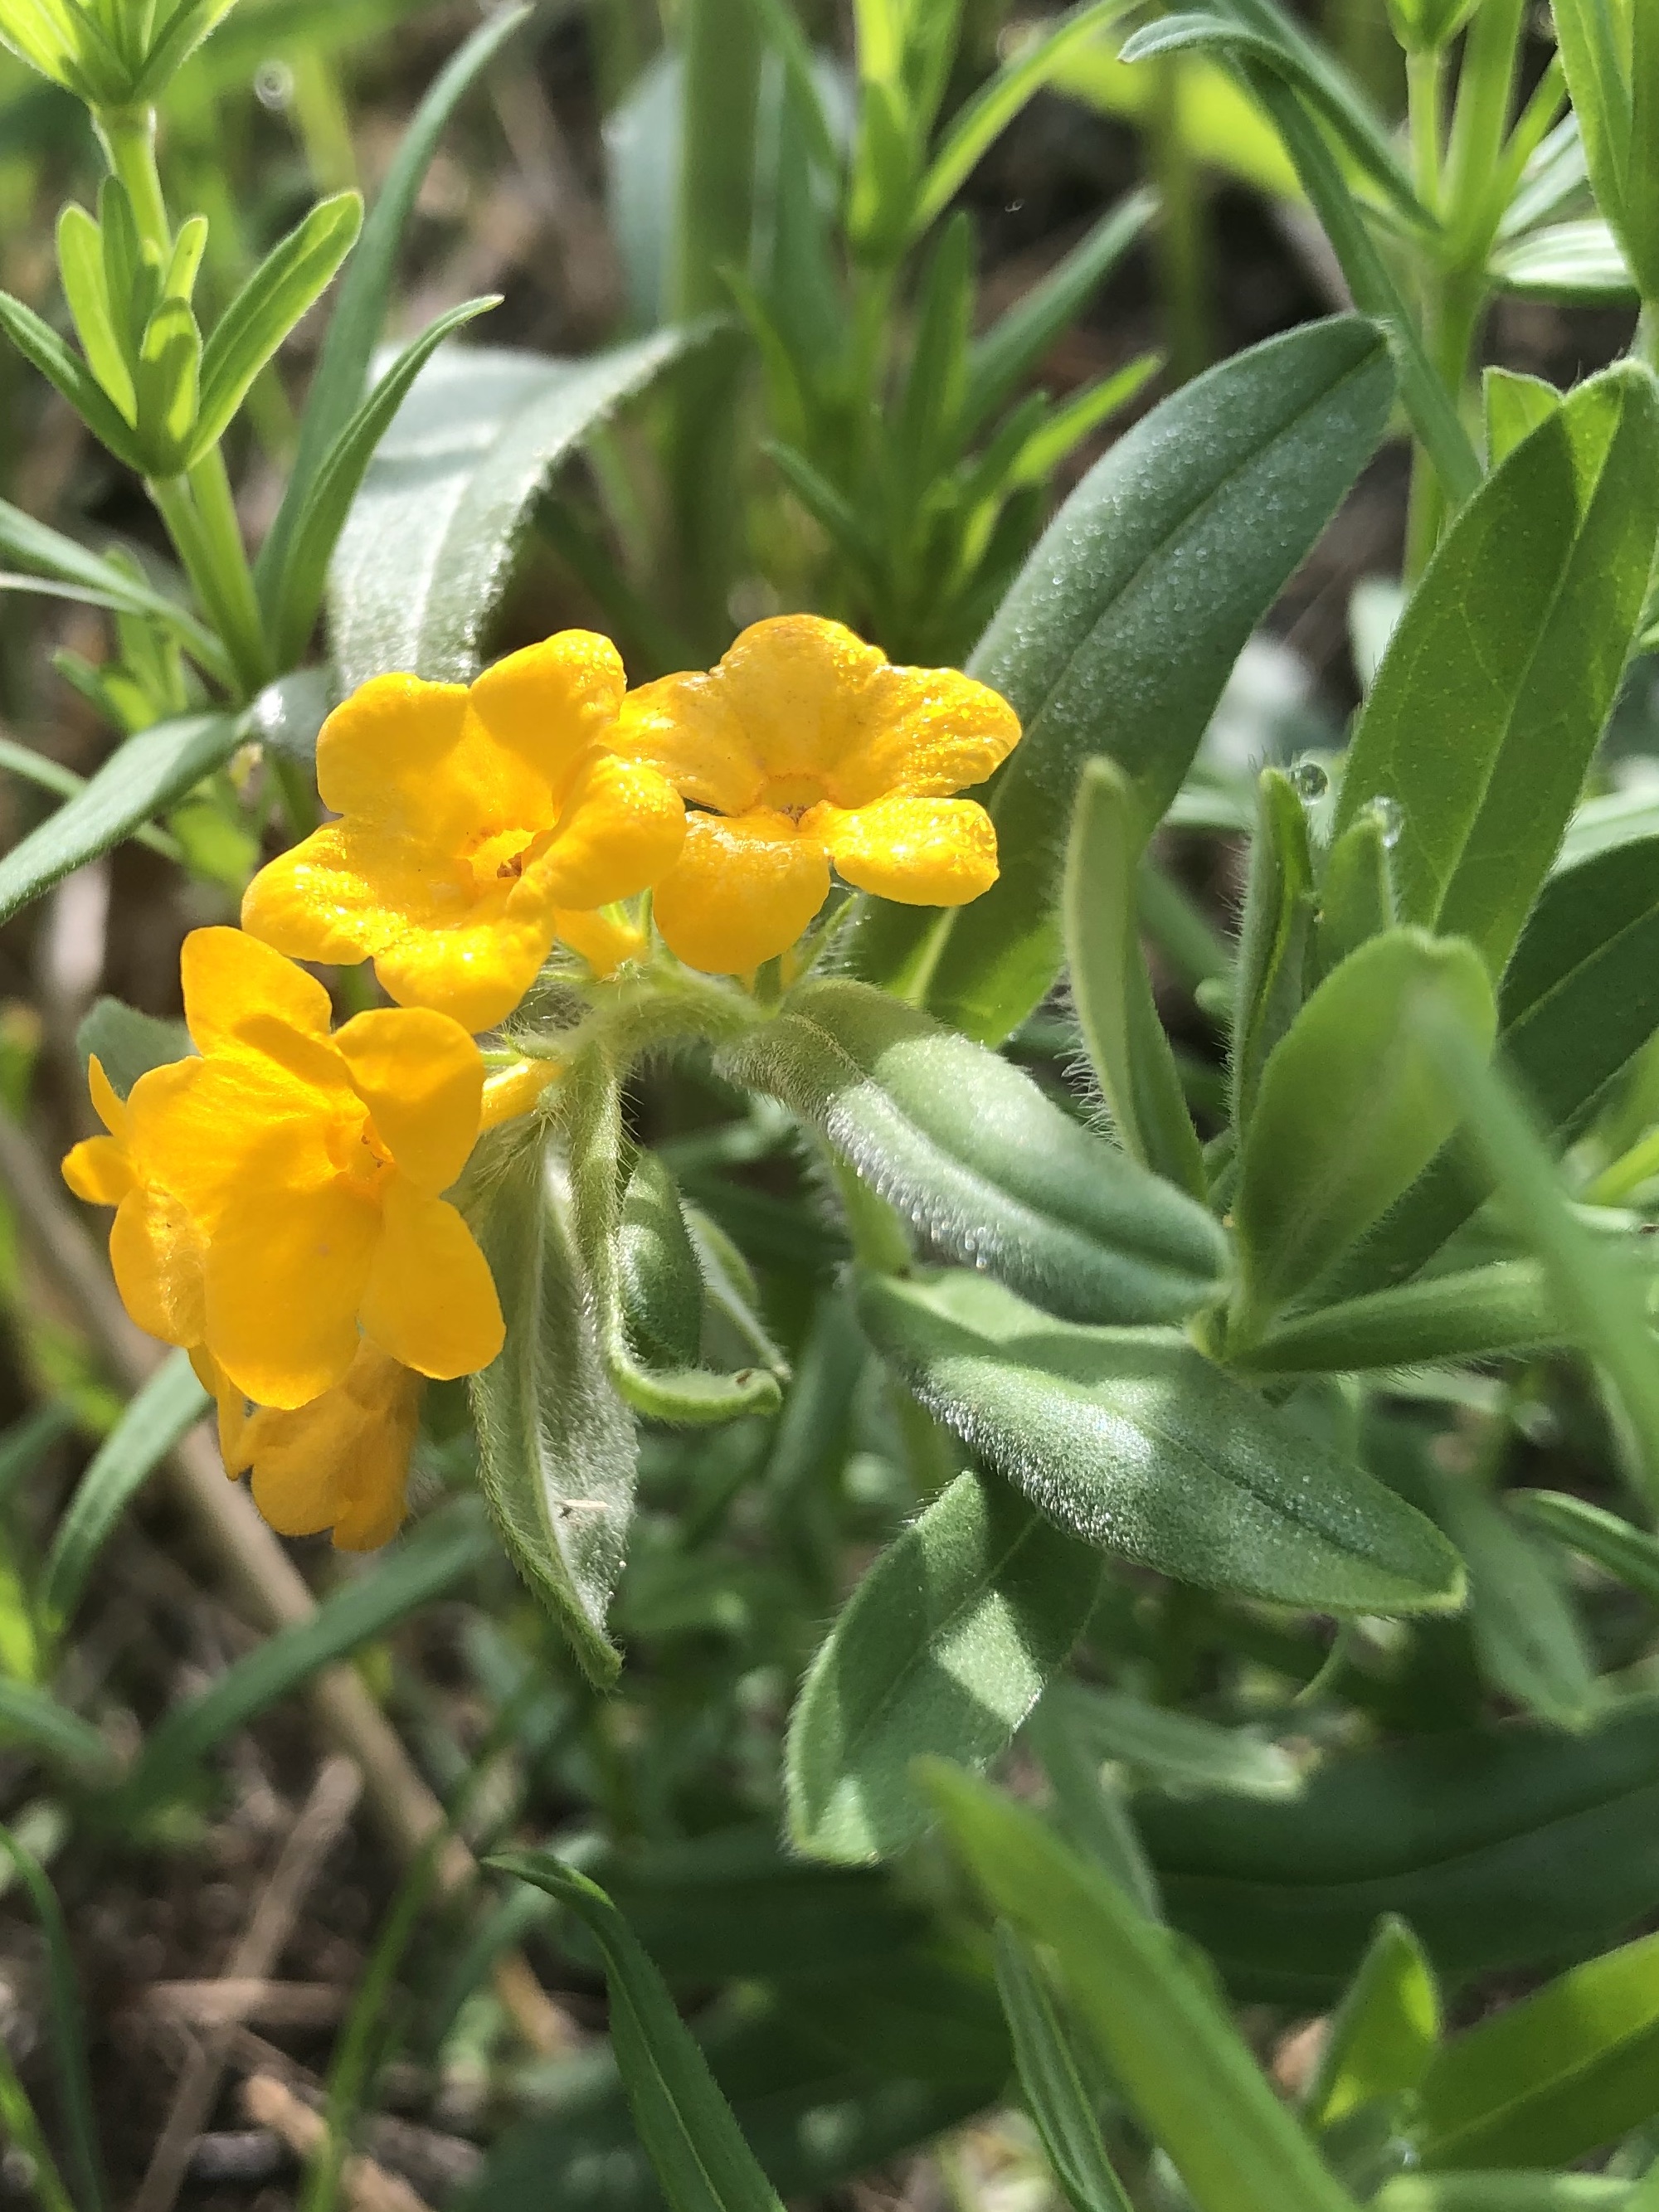 Hoary Puccoon in the Curtis Prairie in the University of Wisconsin-Madison Arboretum in Madison, Wisconsin on May 19, 2022.